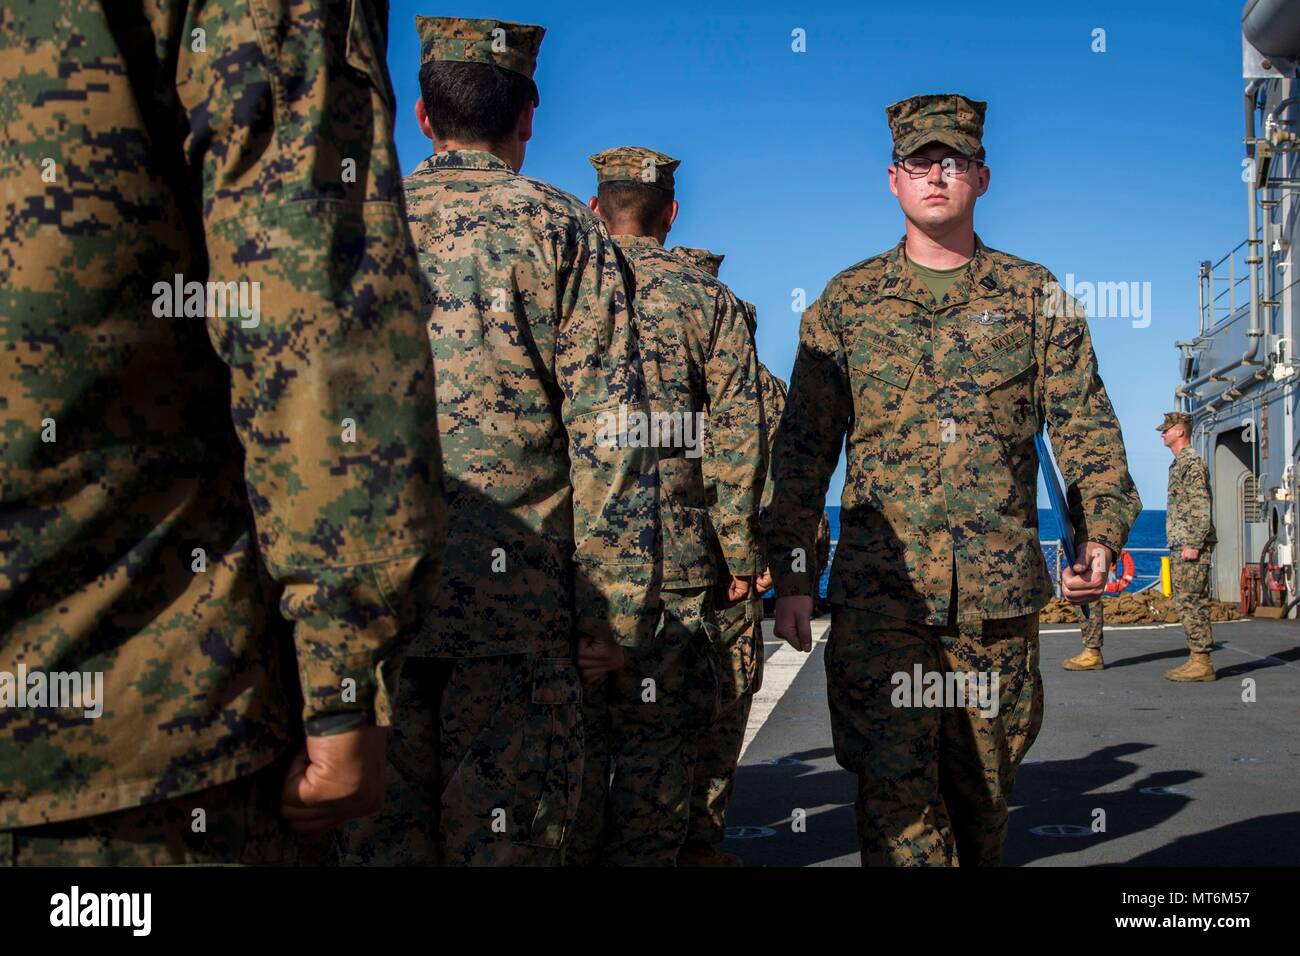 Navy Seaman Charles Patrick, a hospital man attached to Task Force Koa Moana 17 marches after receiving his Enlisted Fleet Marine Force Warfare Specialist Insignia (FMF) award on the USNS Sacagawea, July 28, 2017. The FMF award is given to Navy enlisted personnel who are attached to deployable U.S. Marine Corps units and pass verbal and written exams qualifying the individual adept in Marine Corps history, and knowledge.   (U.S. Marine Corps photo by MCIPAC Combat Camera Lance Cpl. Juan C. Bustos) Stock Photo